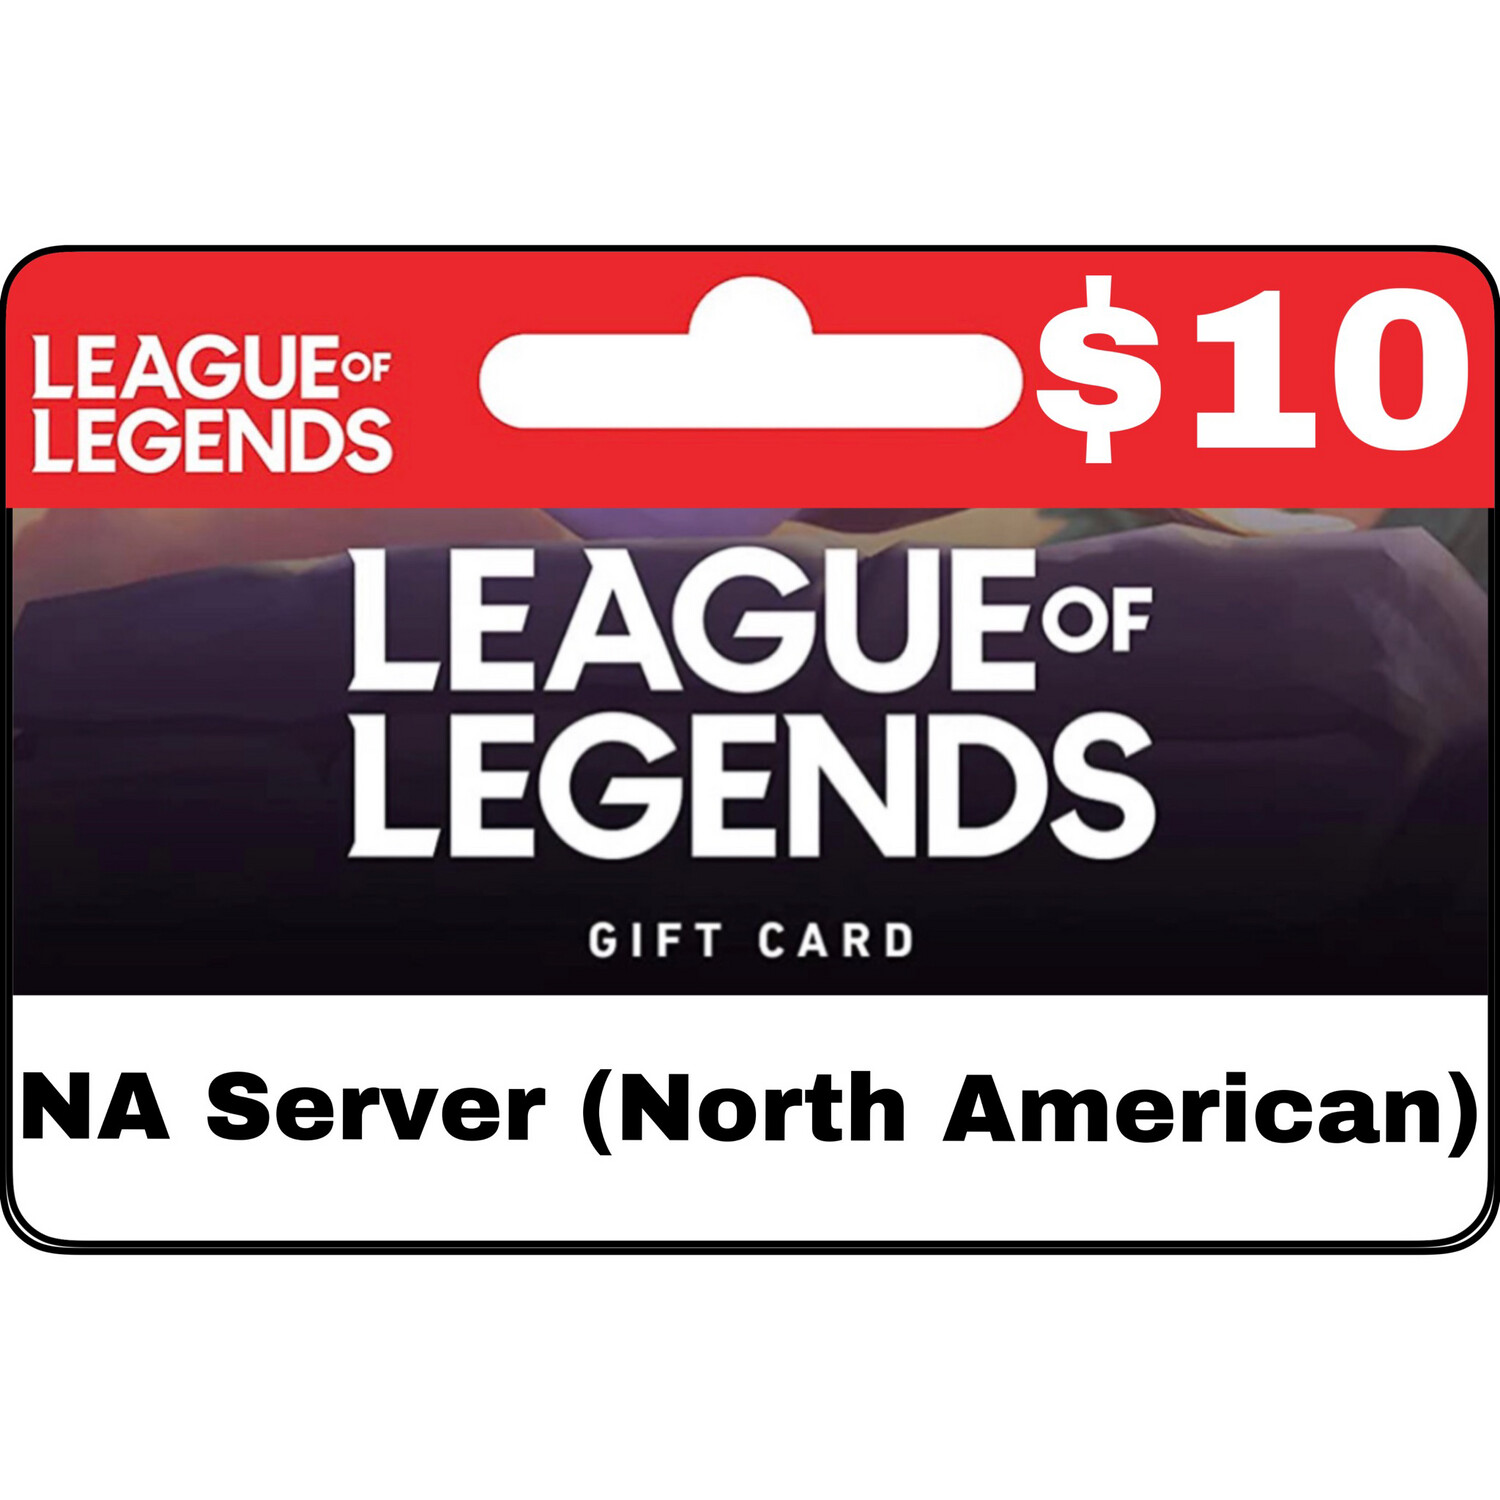 League of Legends USD $10 NA Server Gift Card